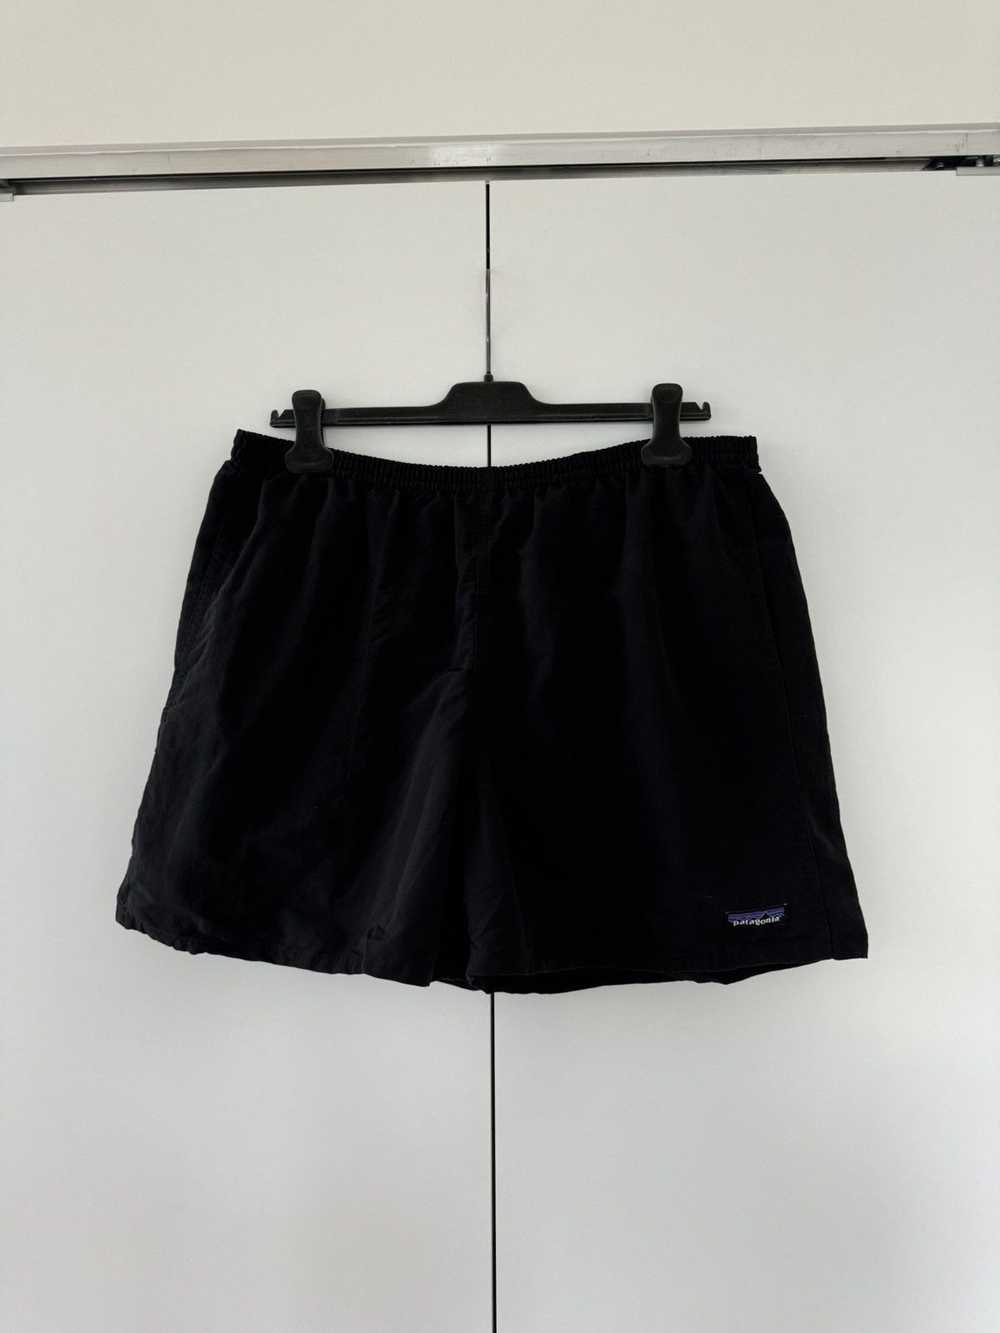 Patagonia 5” Baggie Shorts with Nets Black XL - image 1